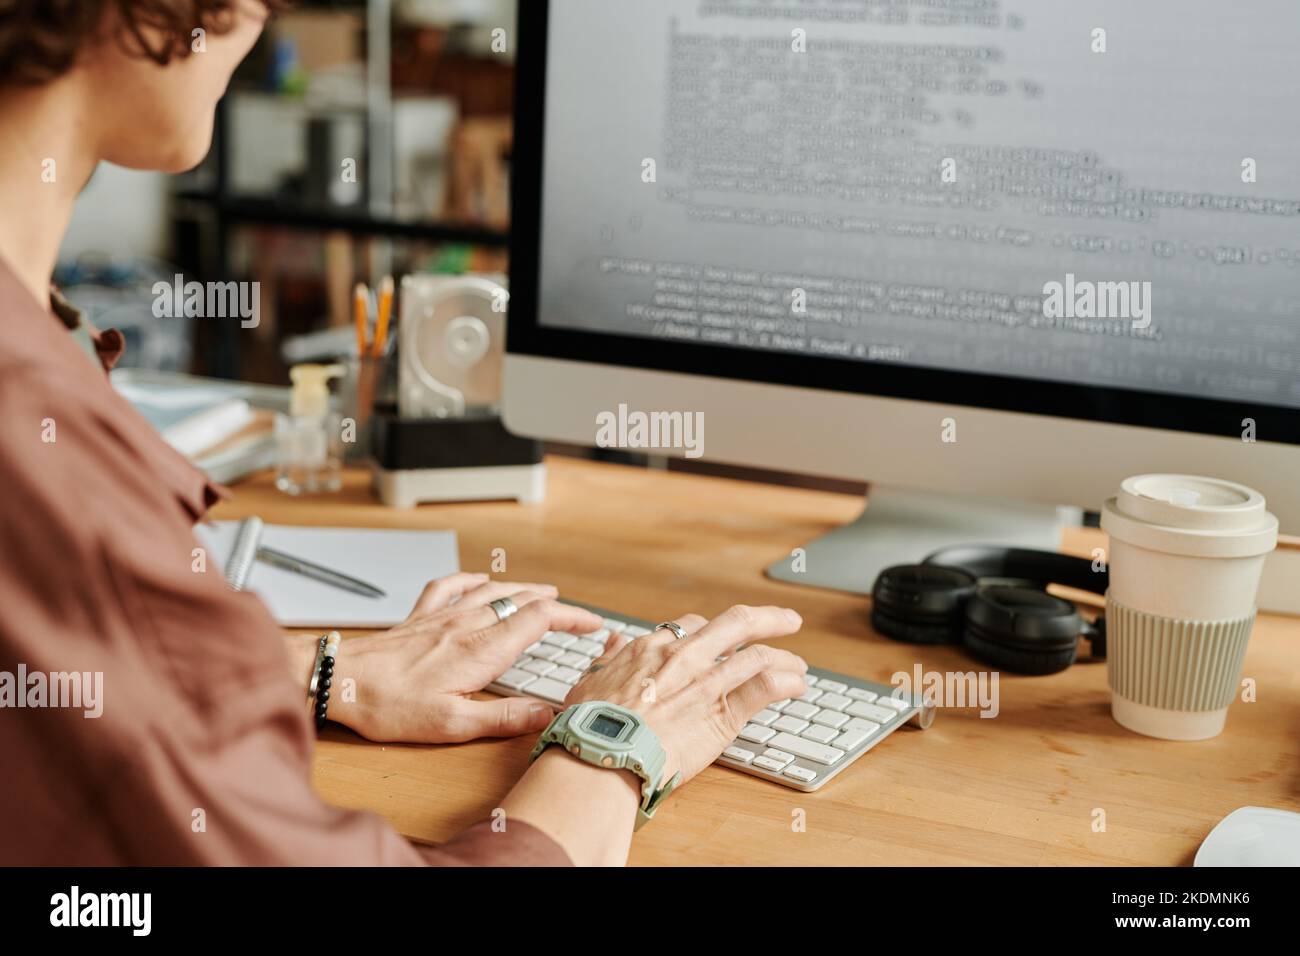 Hands of young female programmer typing on computer keyboard while decoding data on computer screen by workplace in office Stock Photo